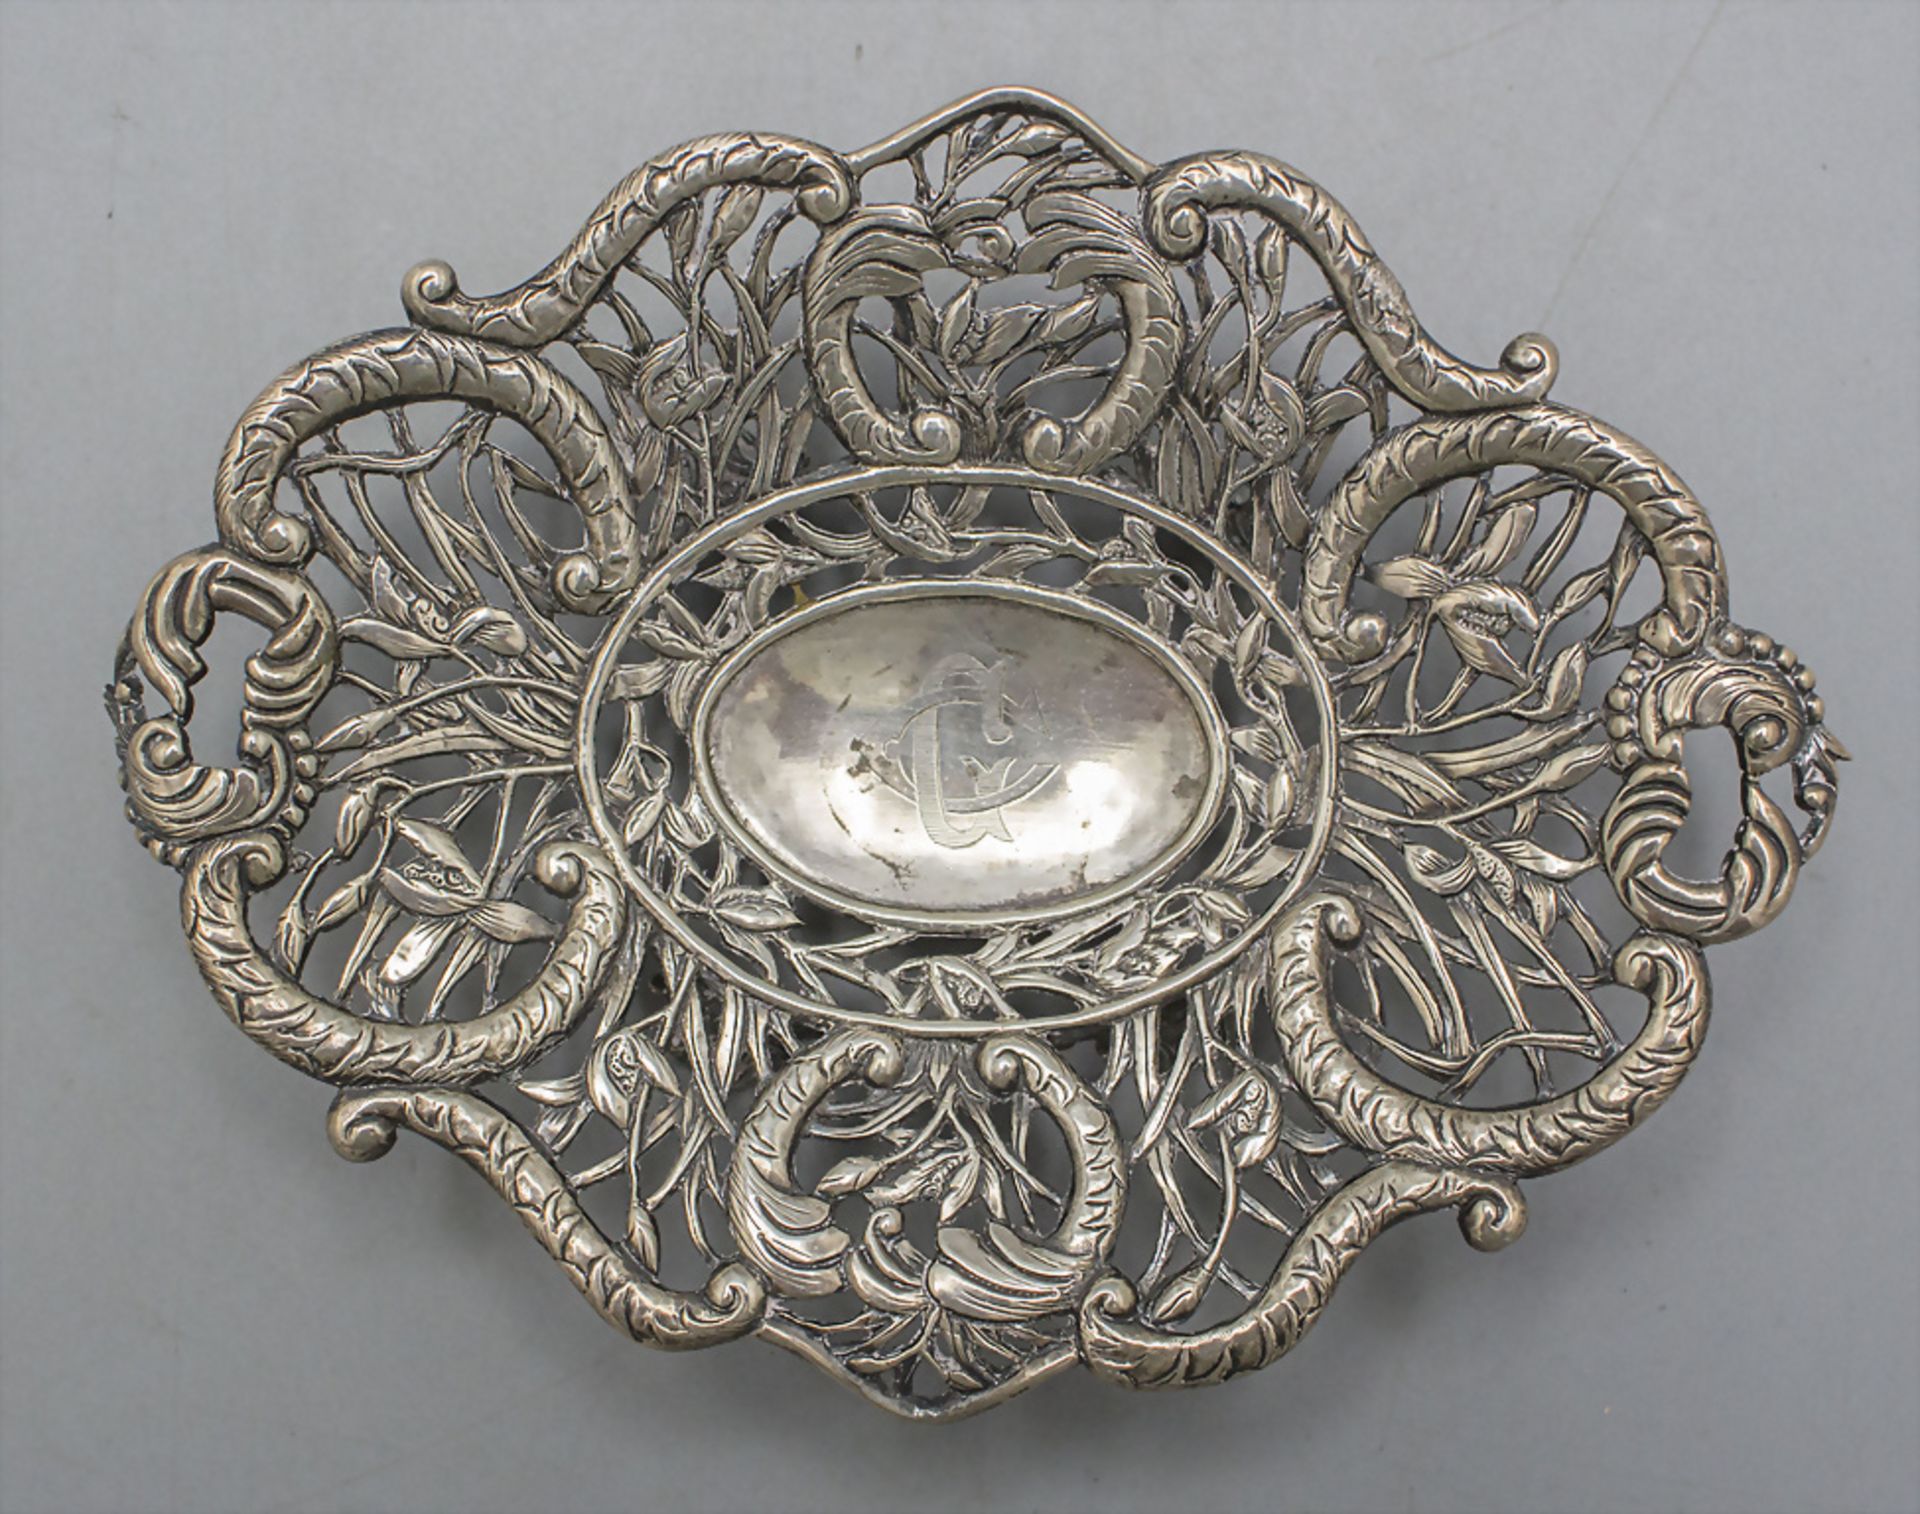 Kleine Korbschale / A small Chinese Export silver basket bowl, Wang Hing & Co., Hong Kong, um 1880 - Image 3 of 5